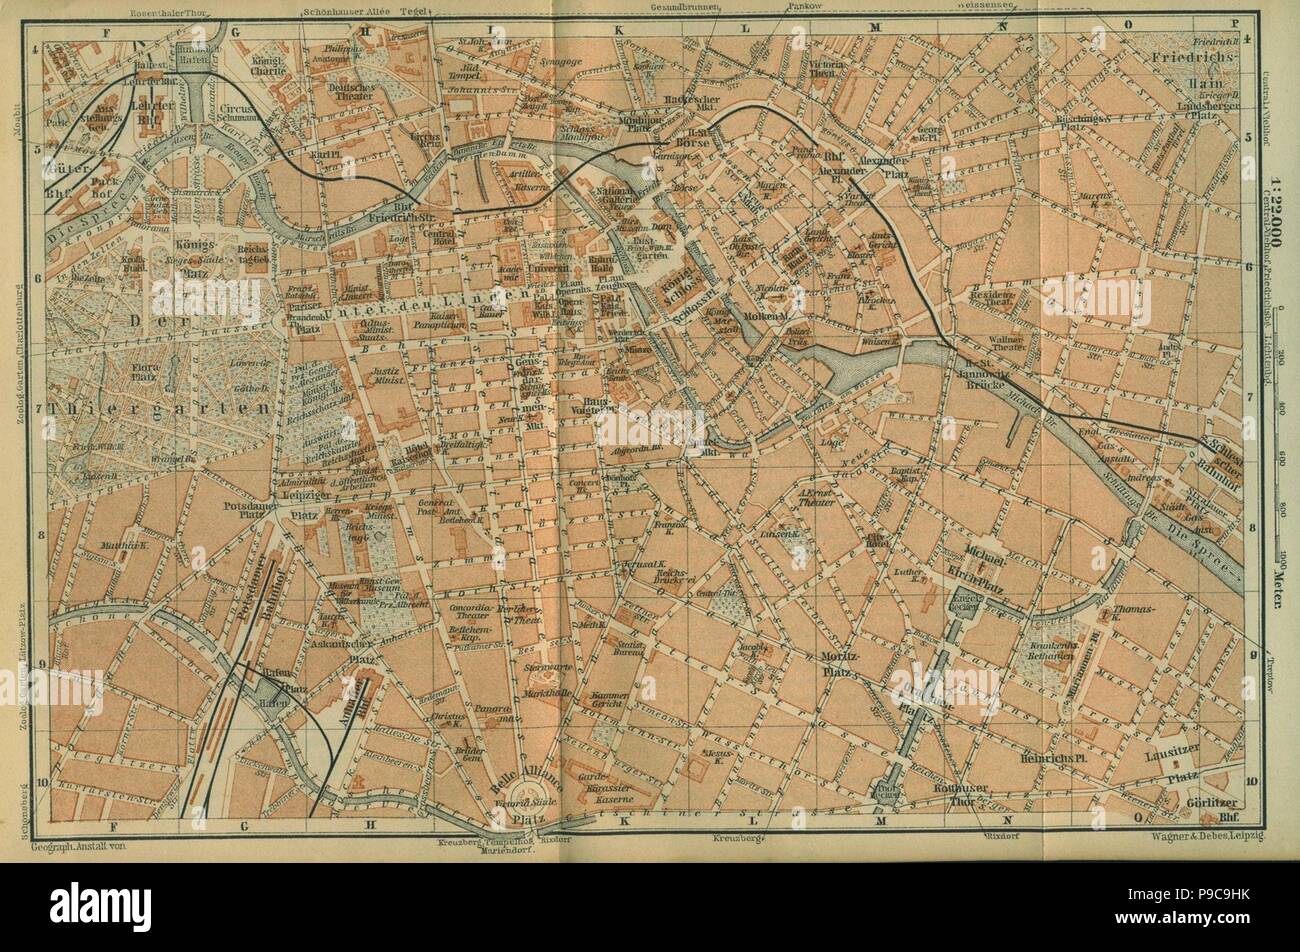 Map of Berlin Center, from a travel guide 'Baedeker's Northeast Germany'. Museum: PRIVATE COLLECTION. Stock Photo